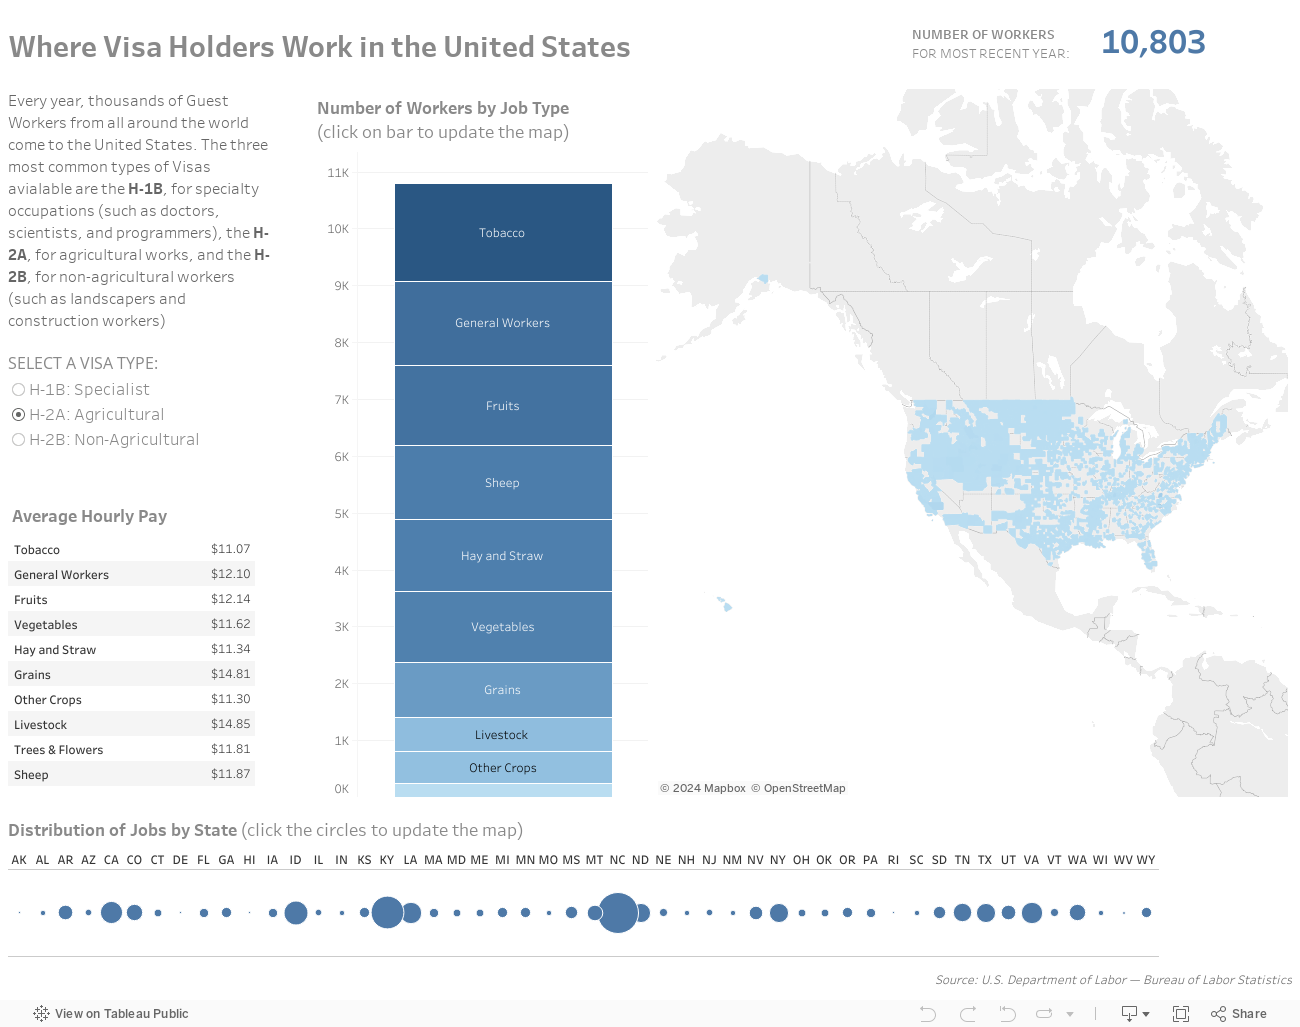 Where Visa Holders Work in the United States 